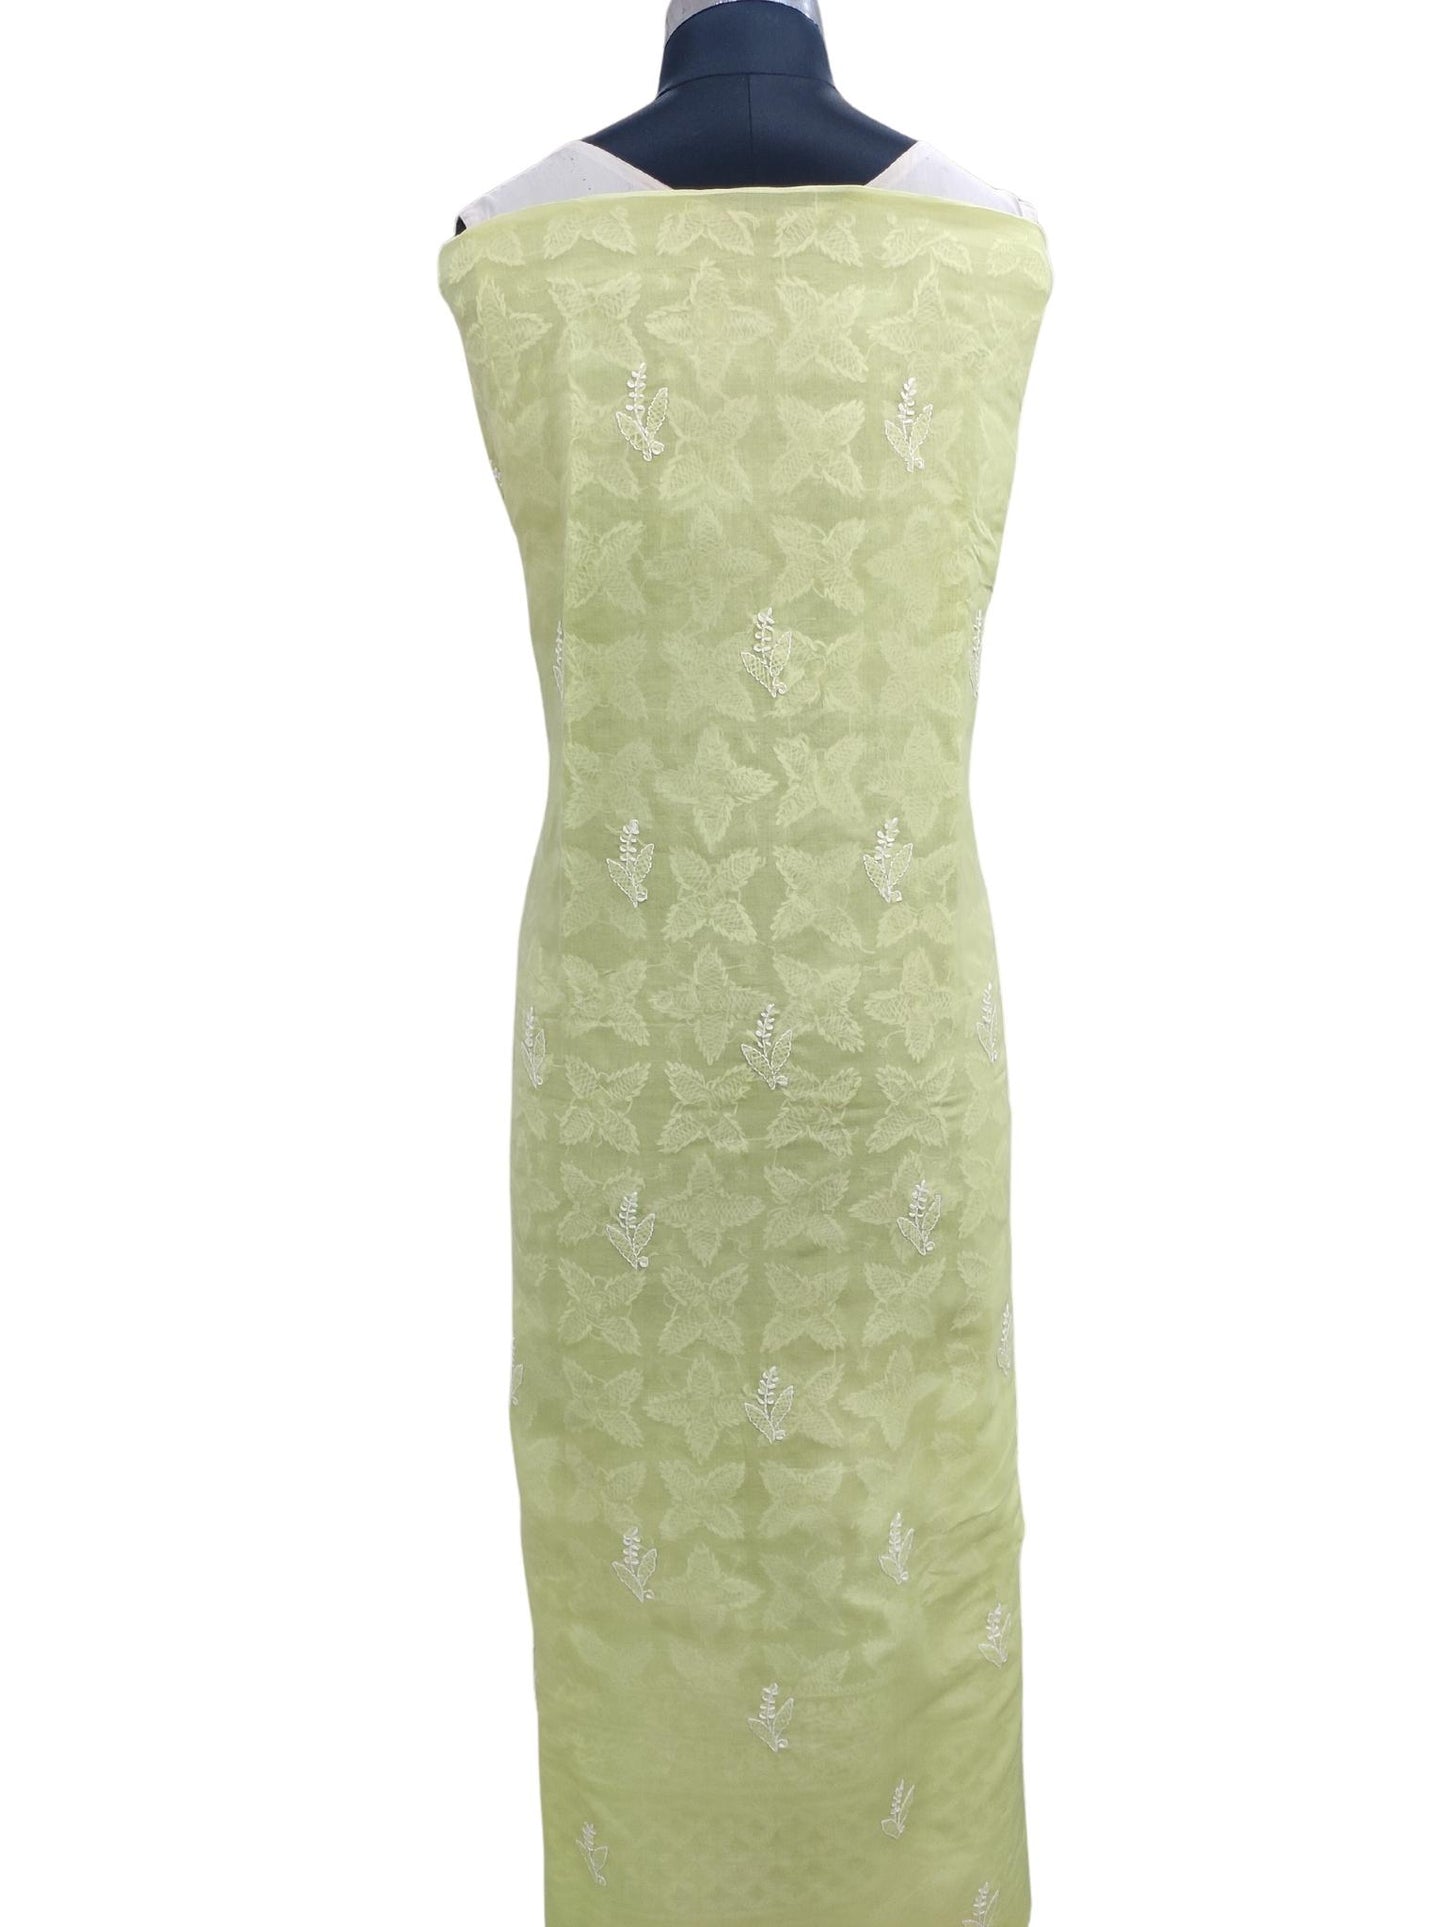 Shyamal Chikan Hand Embroidered Green Cotton Lucknowi Chikankari Unstitched Suit Piece- S18315